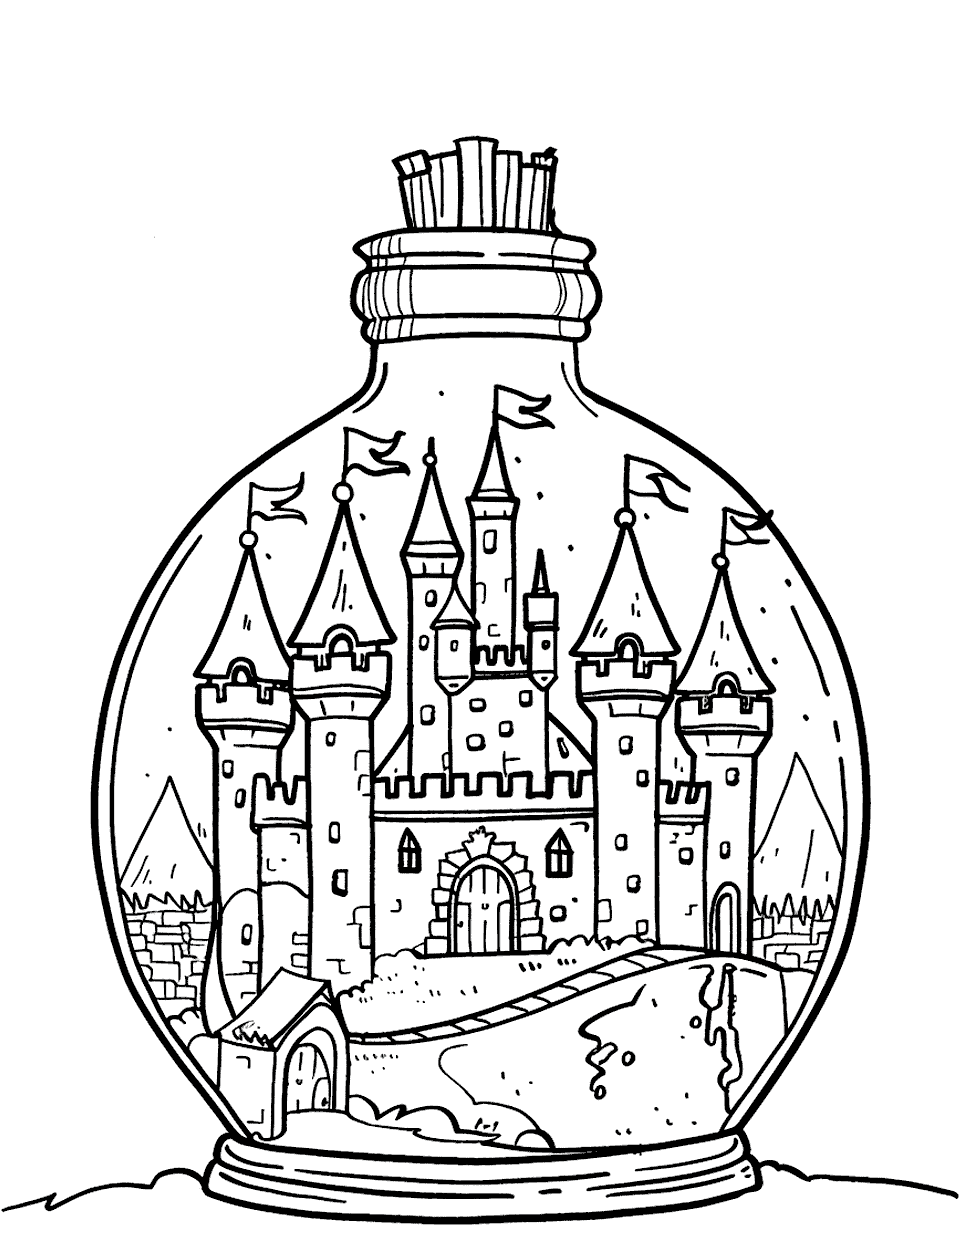 Castle in a Bottle Coloring Page - A fantastical scene of a tiny castle inside a glass bottle.